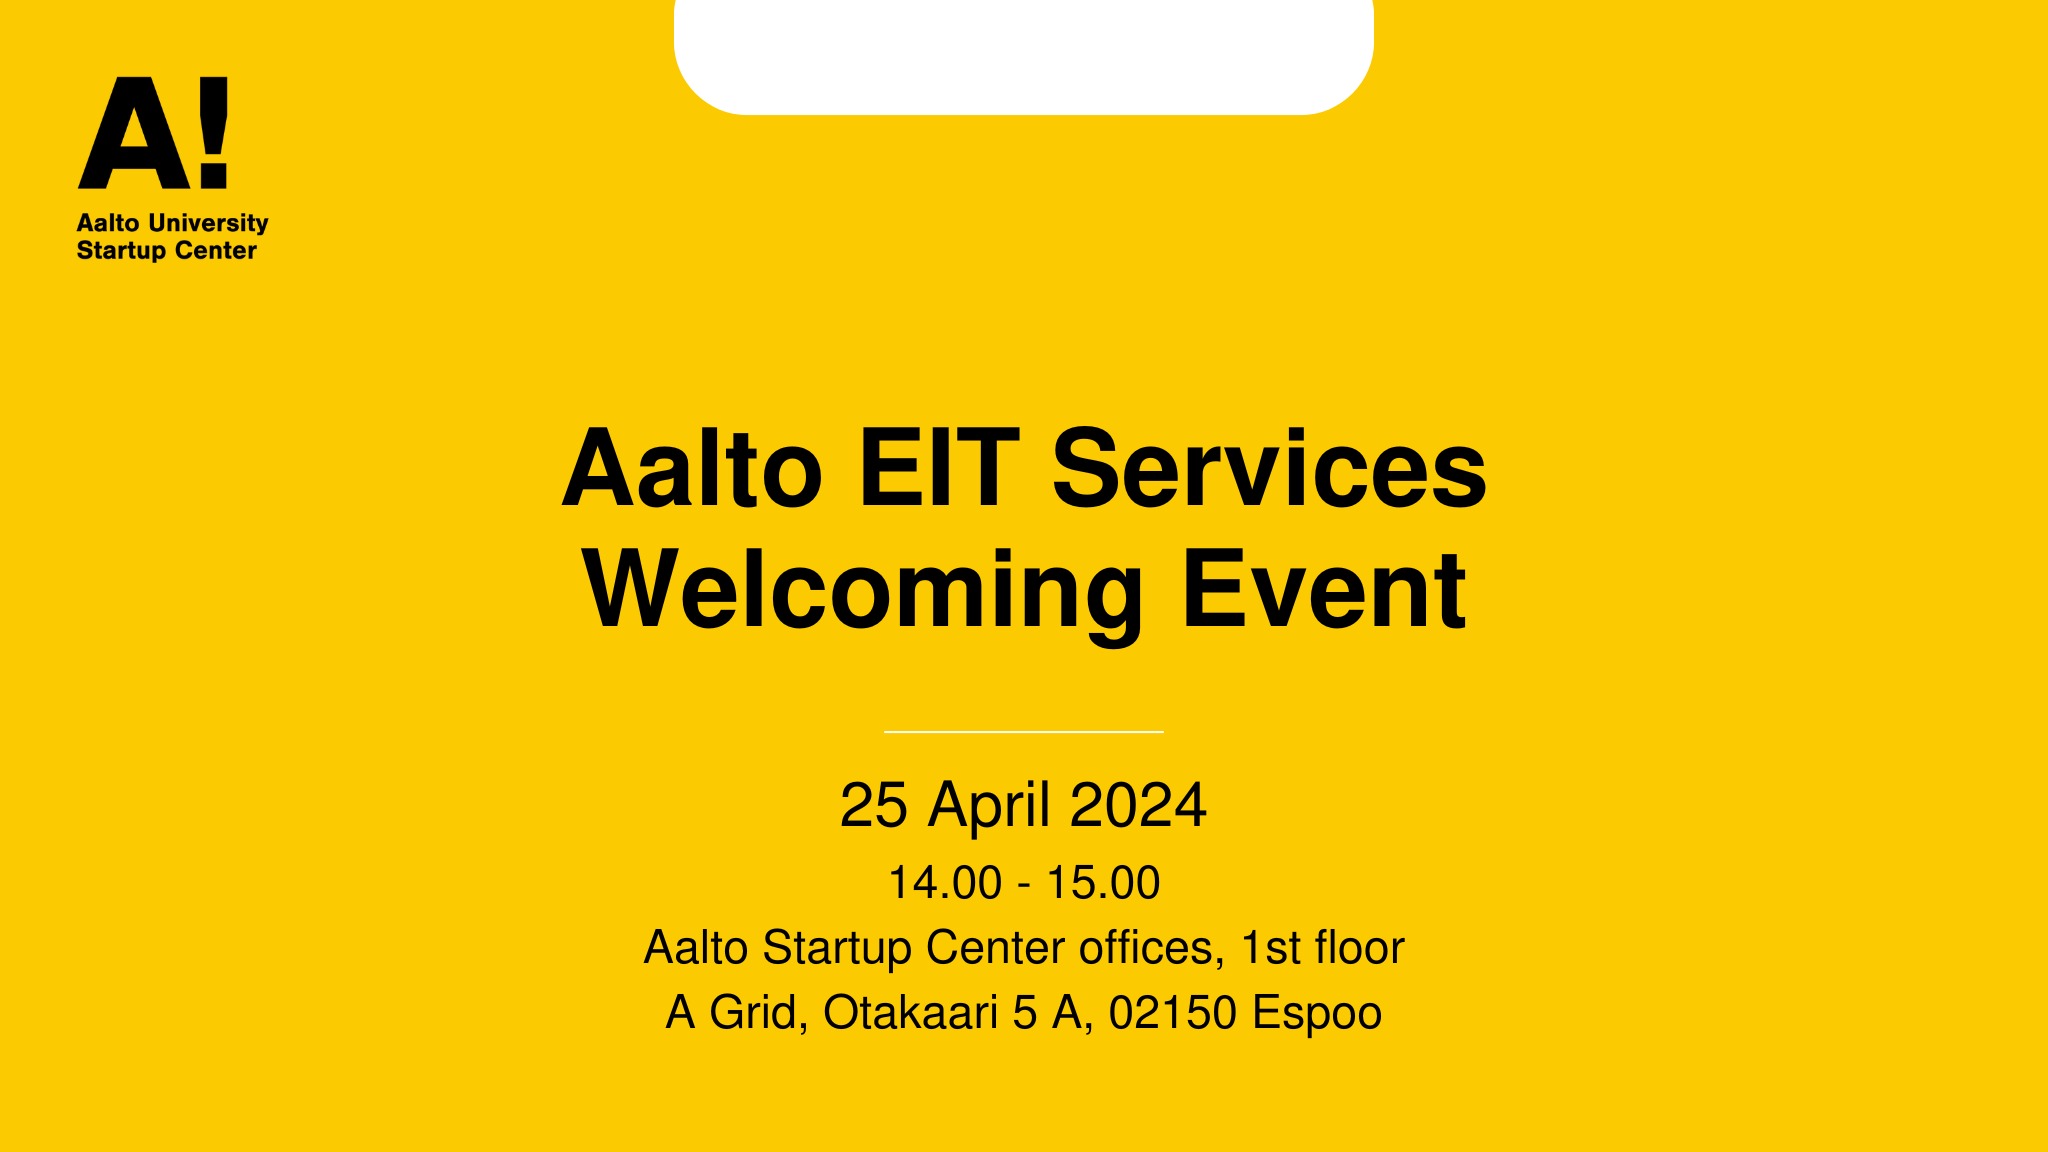 Aalto EIT Services Welcoming Meetup - Aalto Startup Center